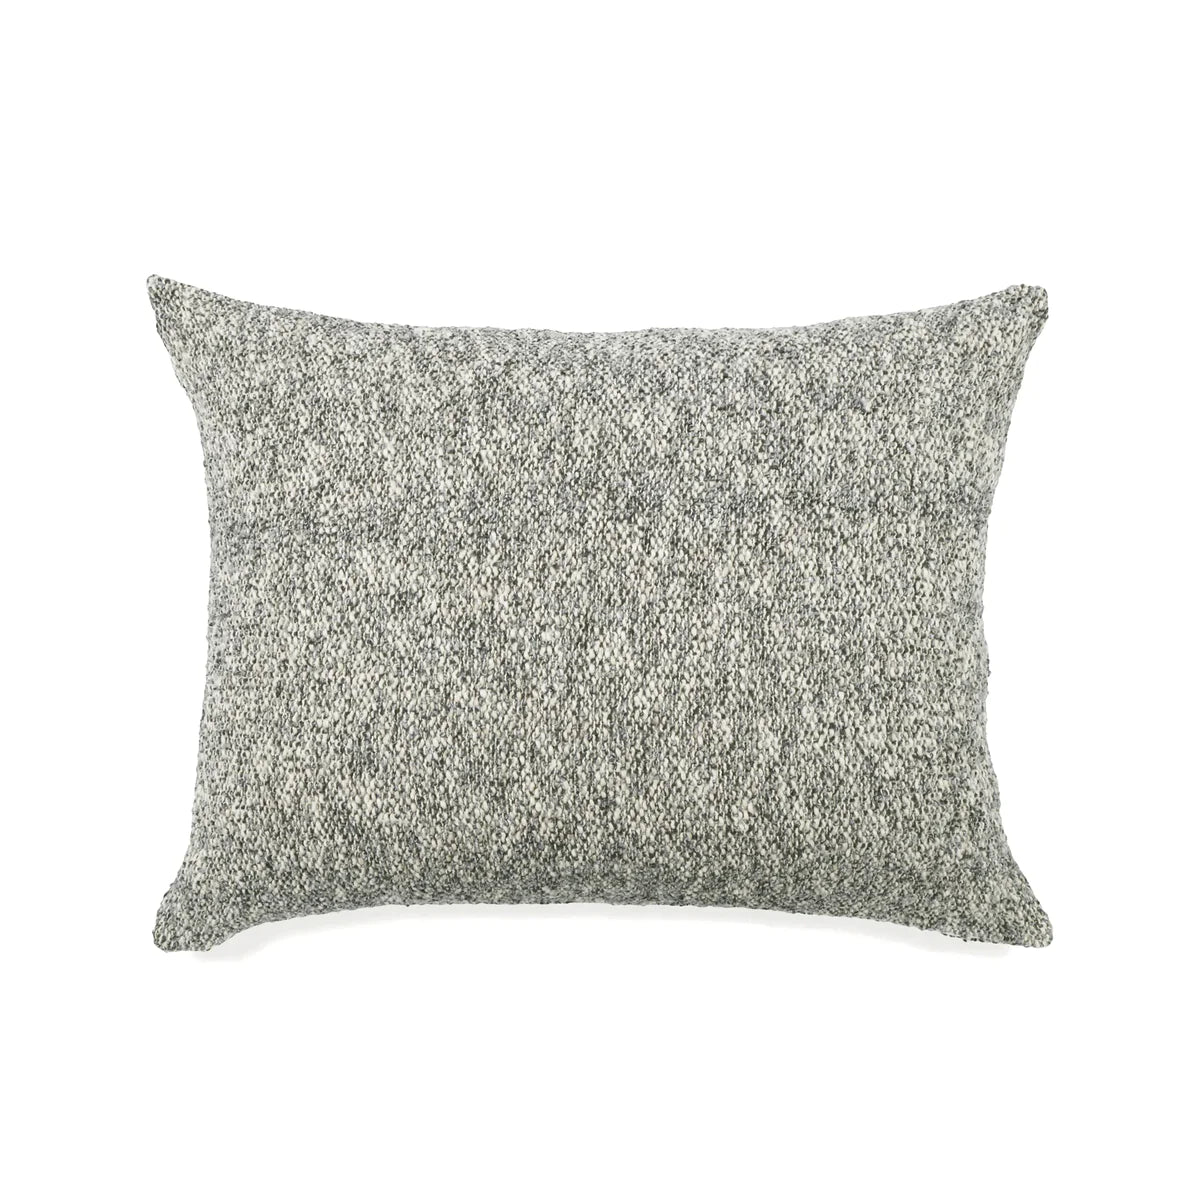 Brentwood Big Pillow by Pom Pom at Home